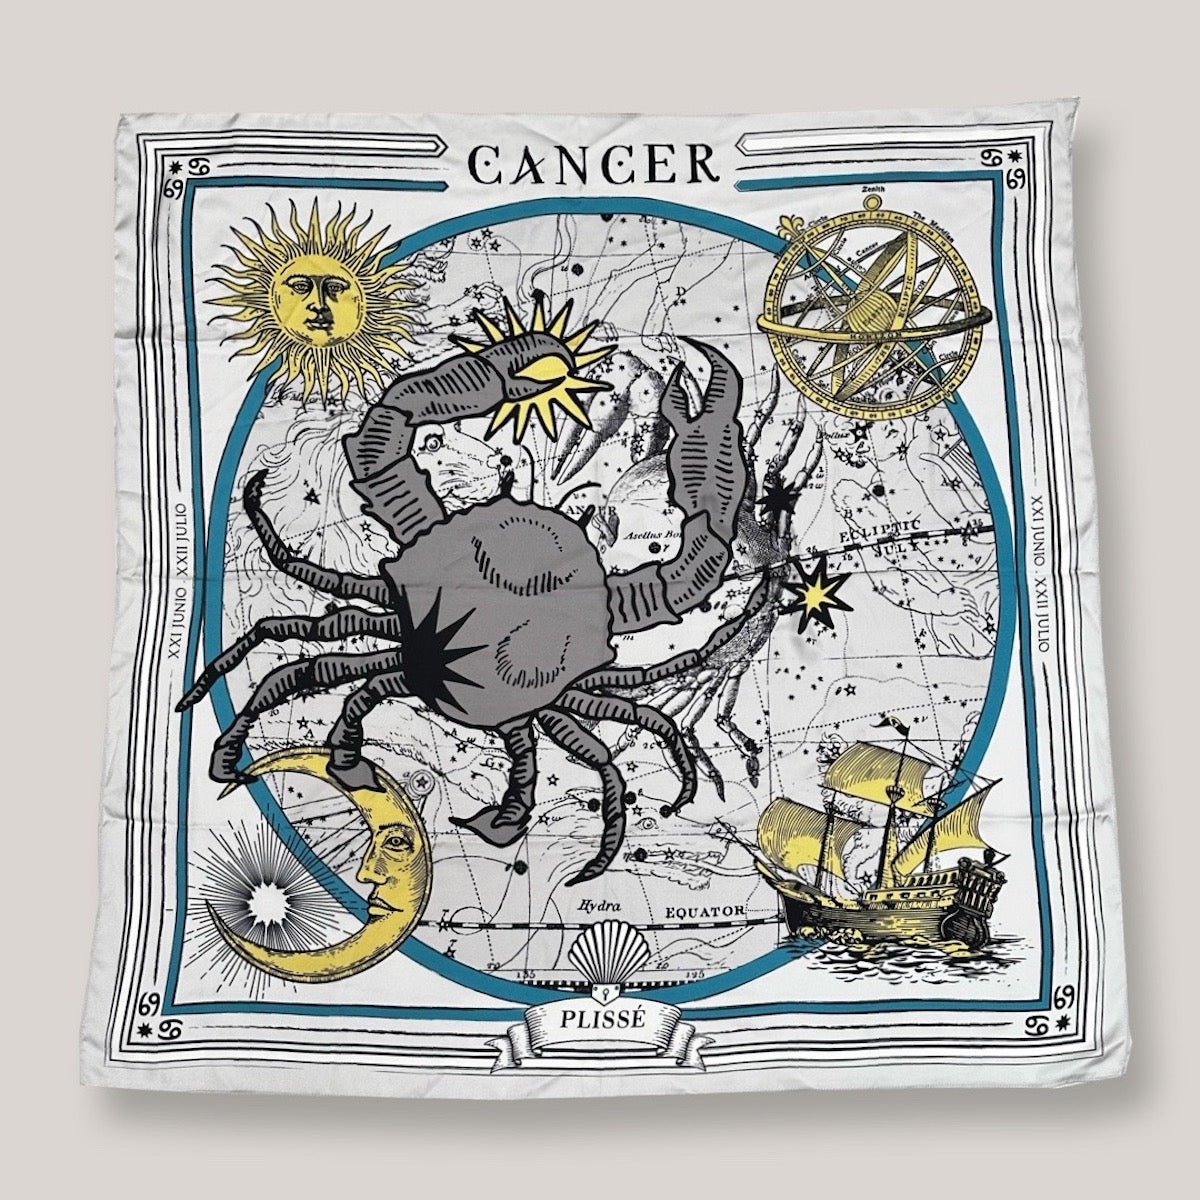 Zodiac scarf for Cancer by Plissé. Off white colored scarf with image of crab, astrological background, sun and moon details. Scarf on plain white background.